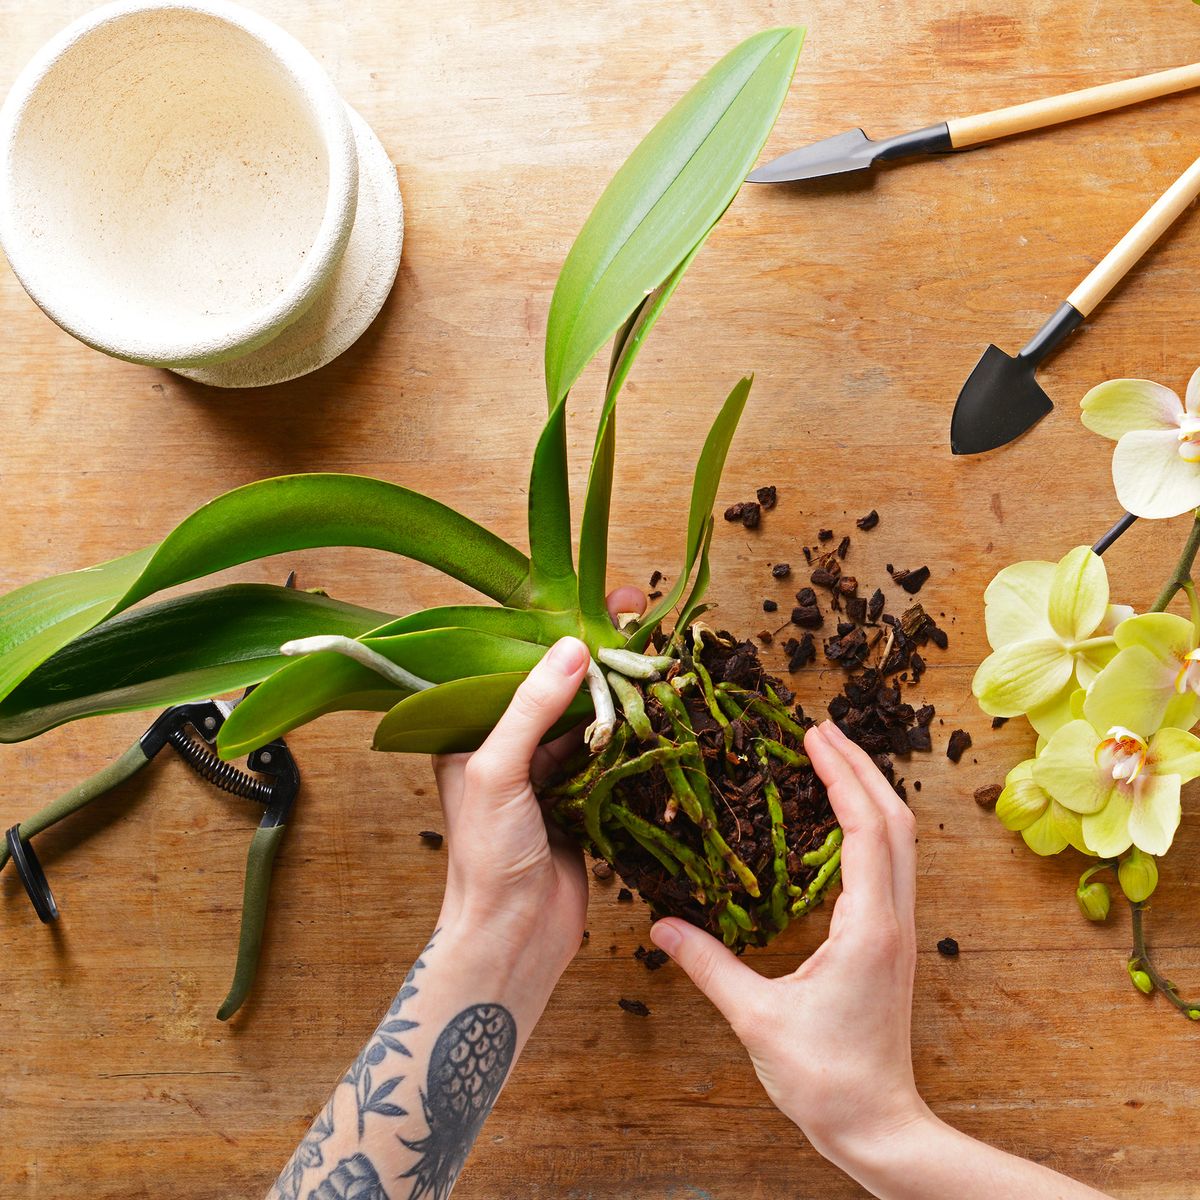 How To Revive An Orchid: 5 Ways To Bring It Back To Life